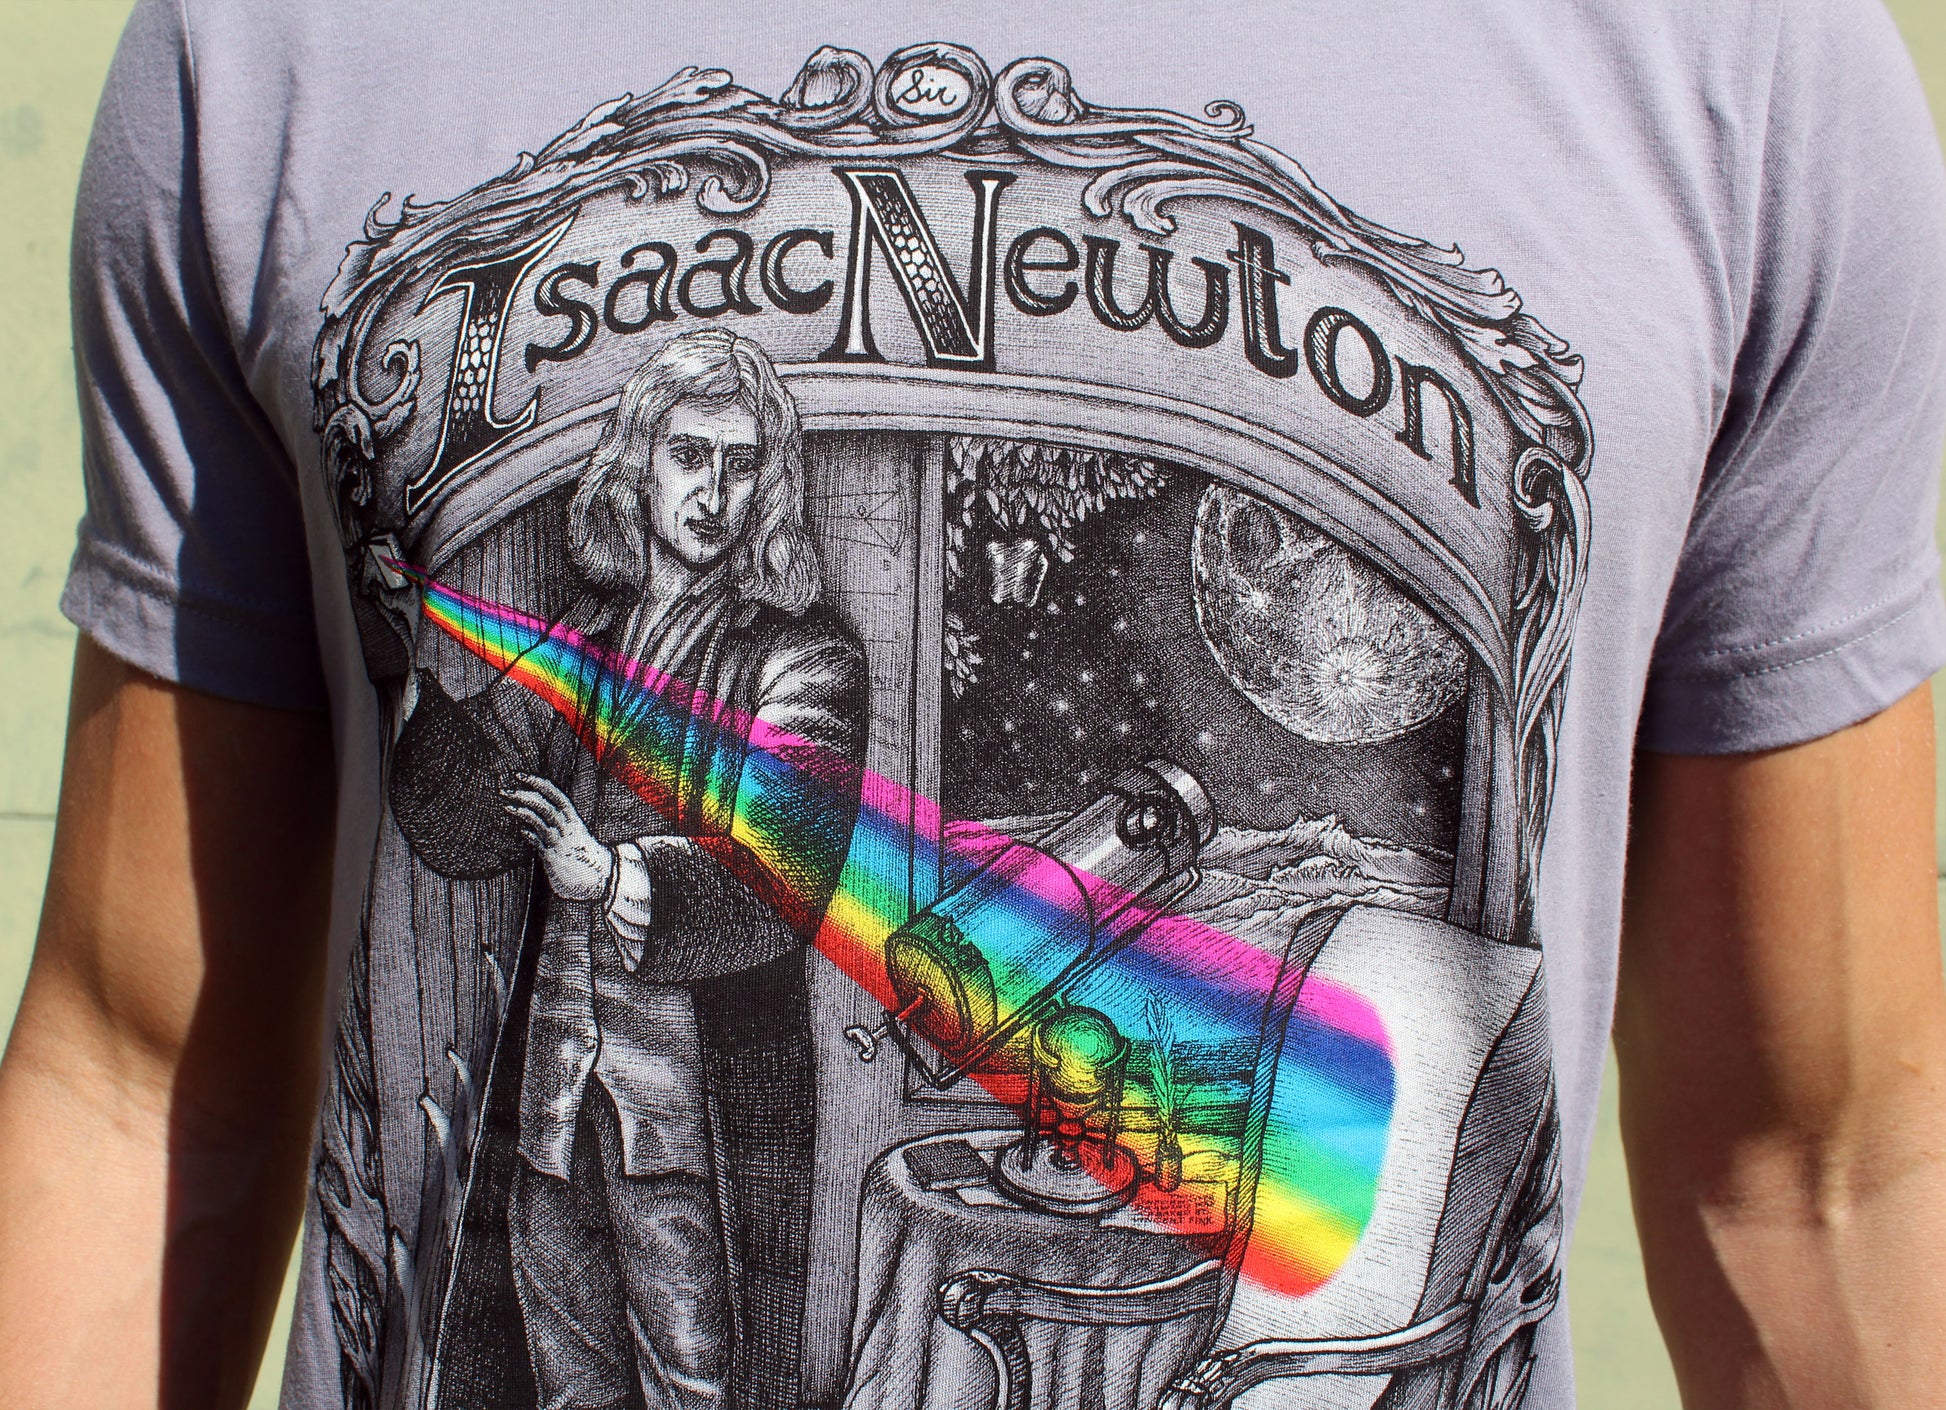 Isaac Newton: The Man of Revolution - HubPages